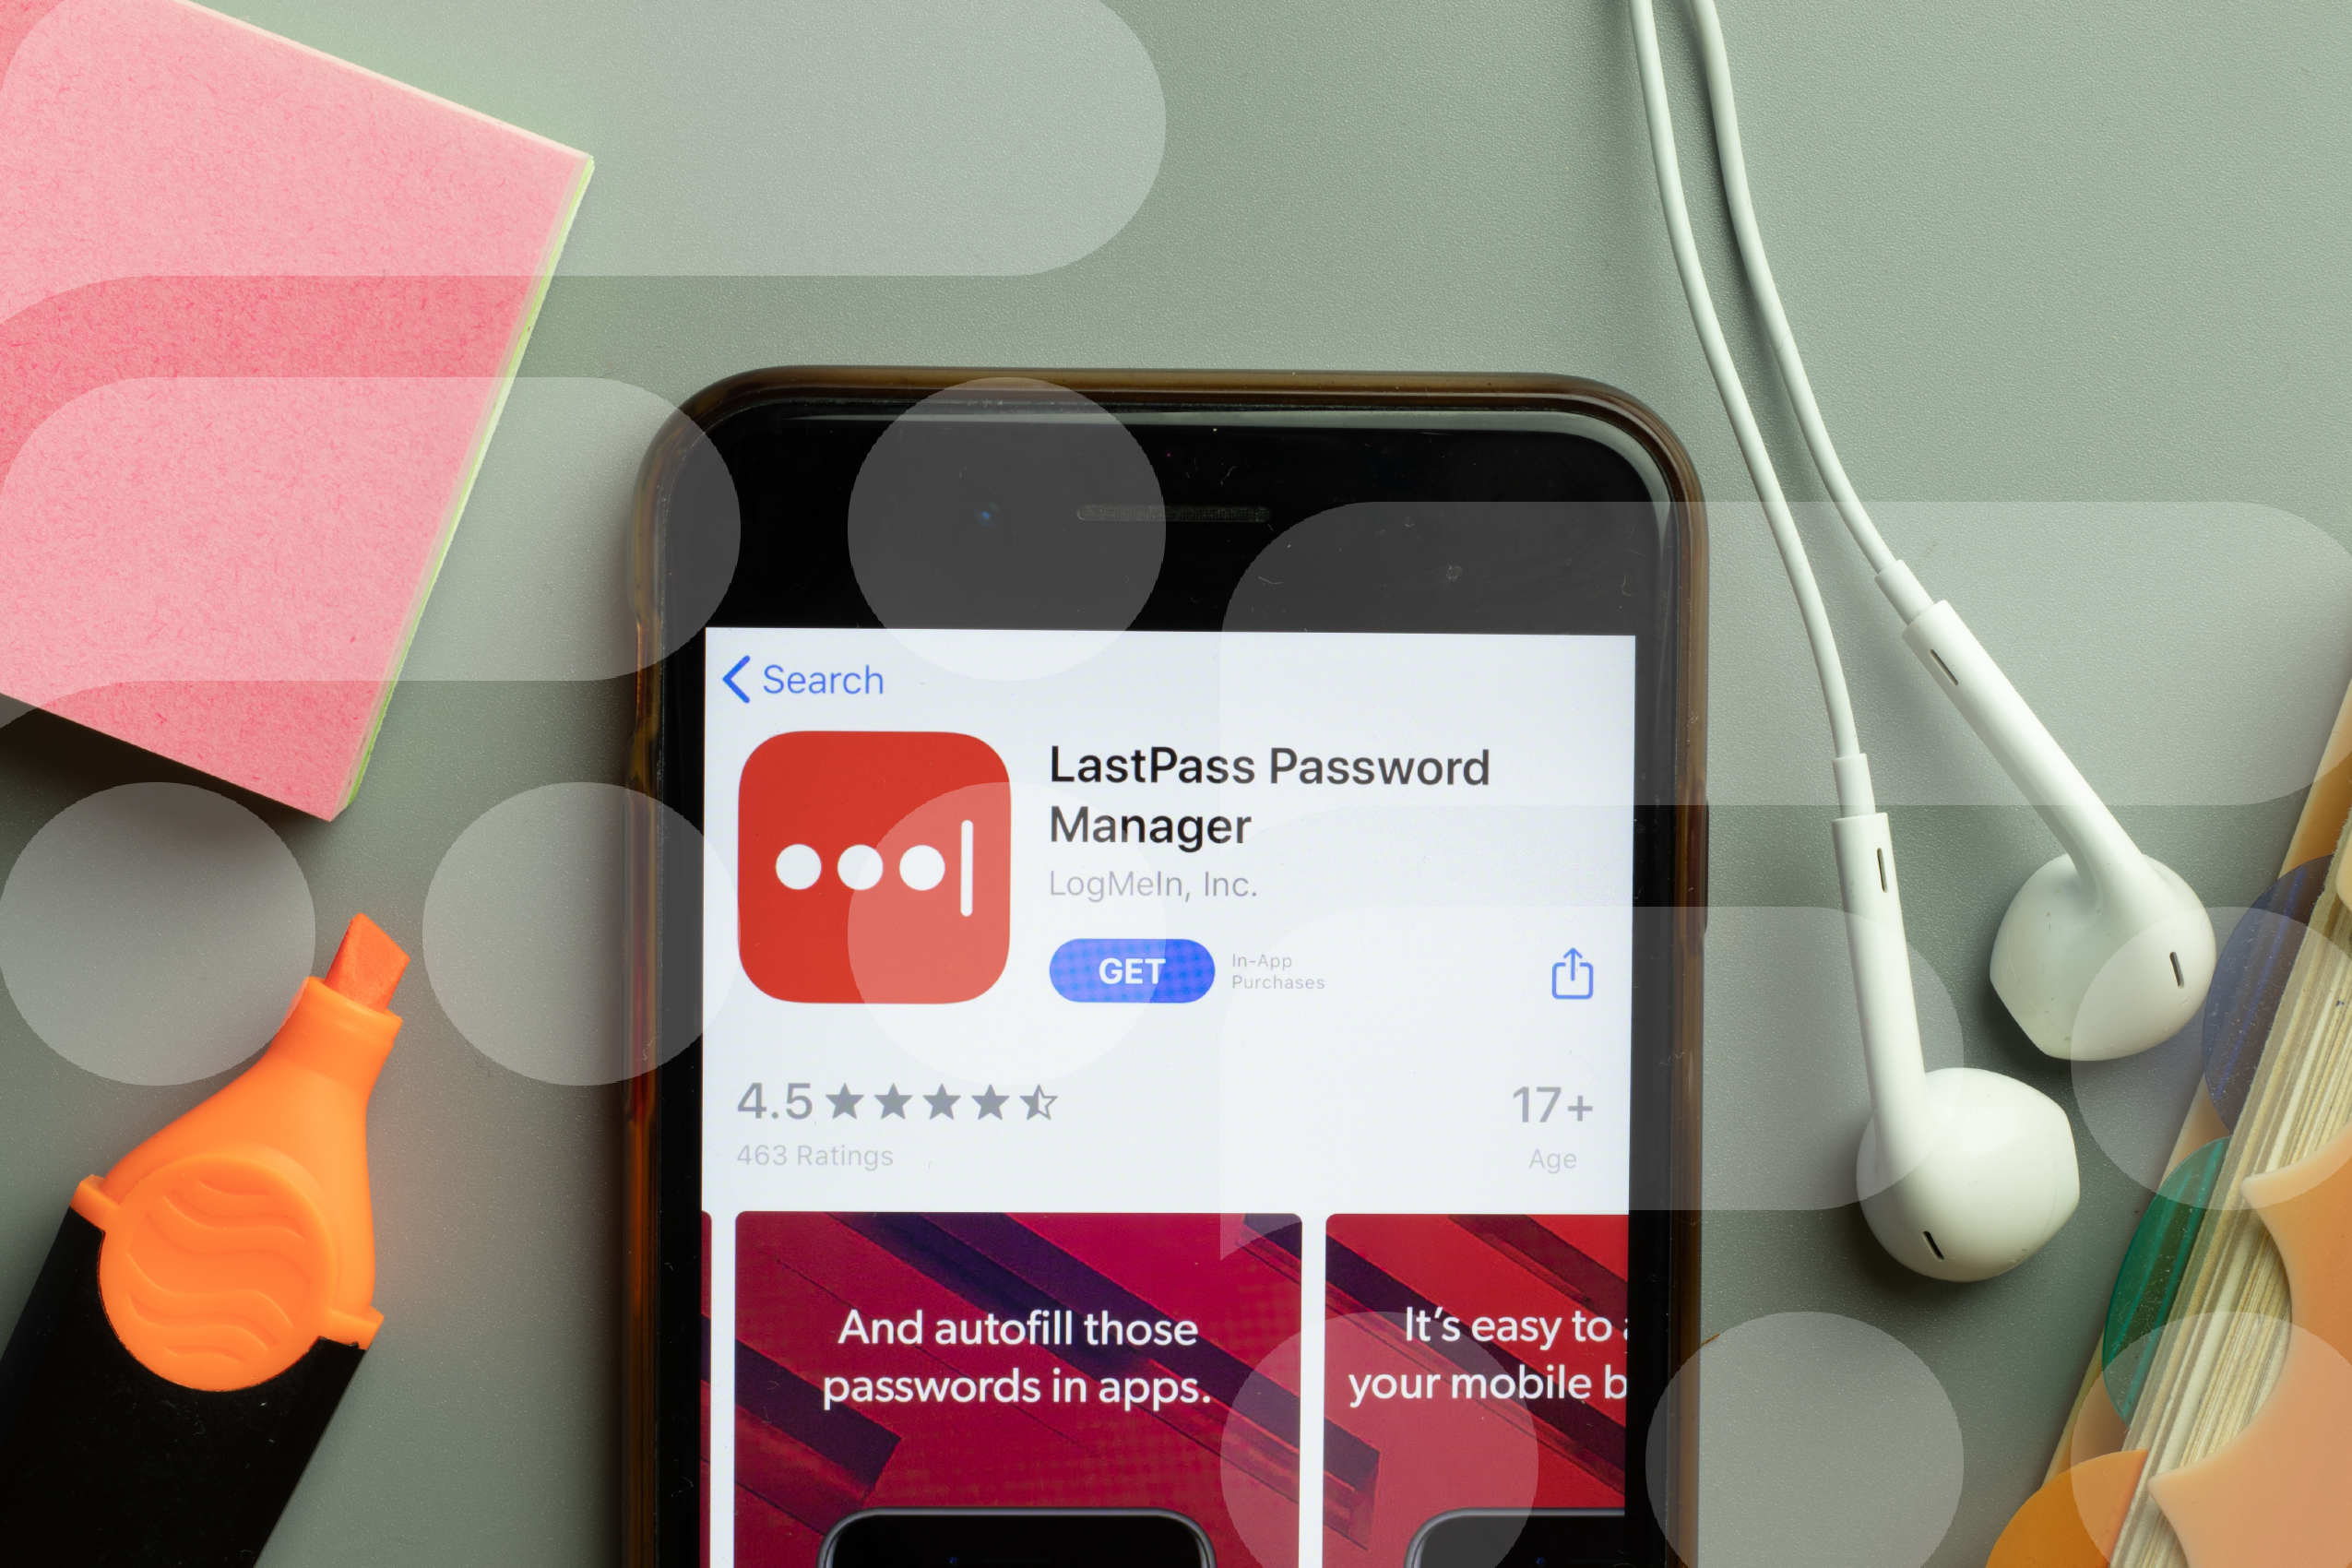 What can other businesses learn from the recent cyber-attack on password manager LastPass?